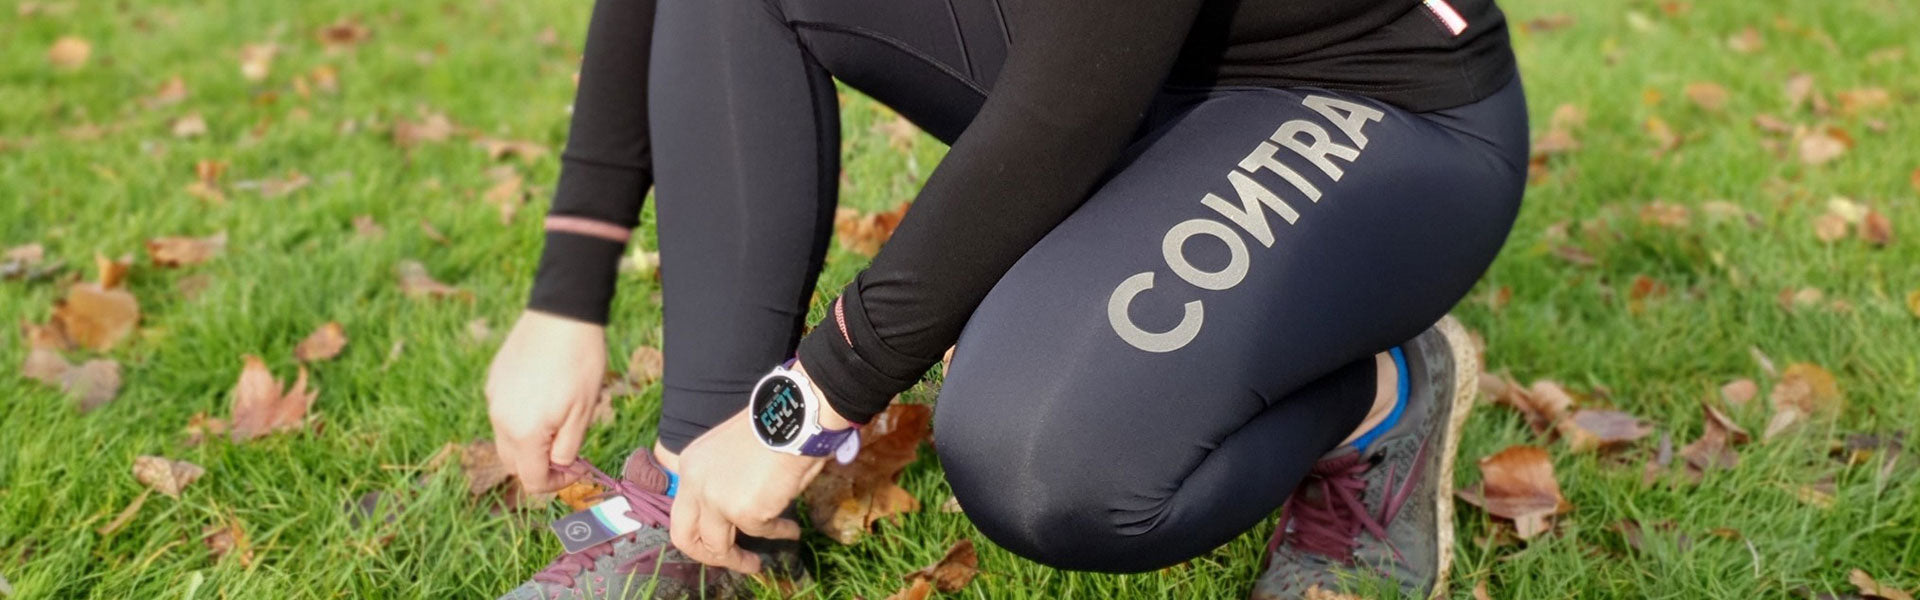 Add colour to your parkrun with Contra's new running tights